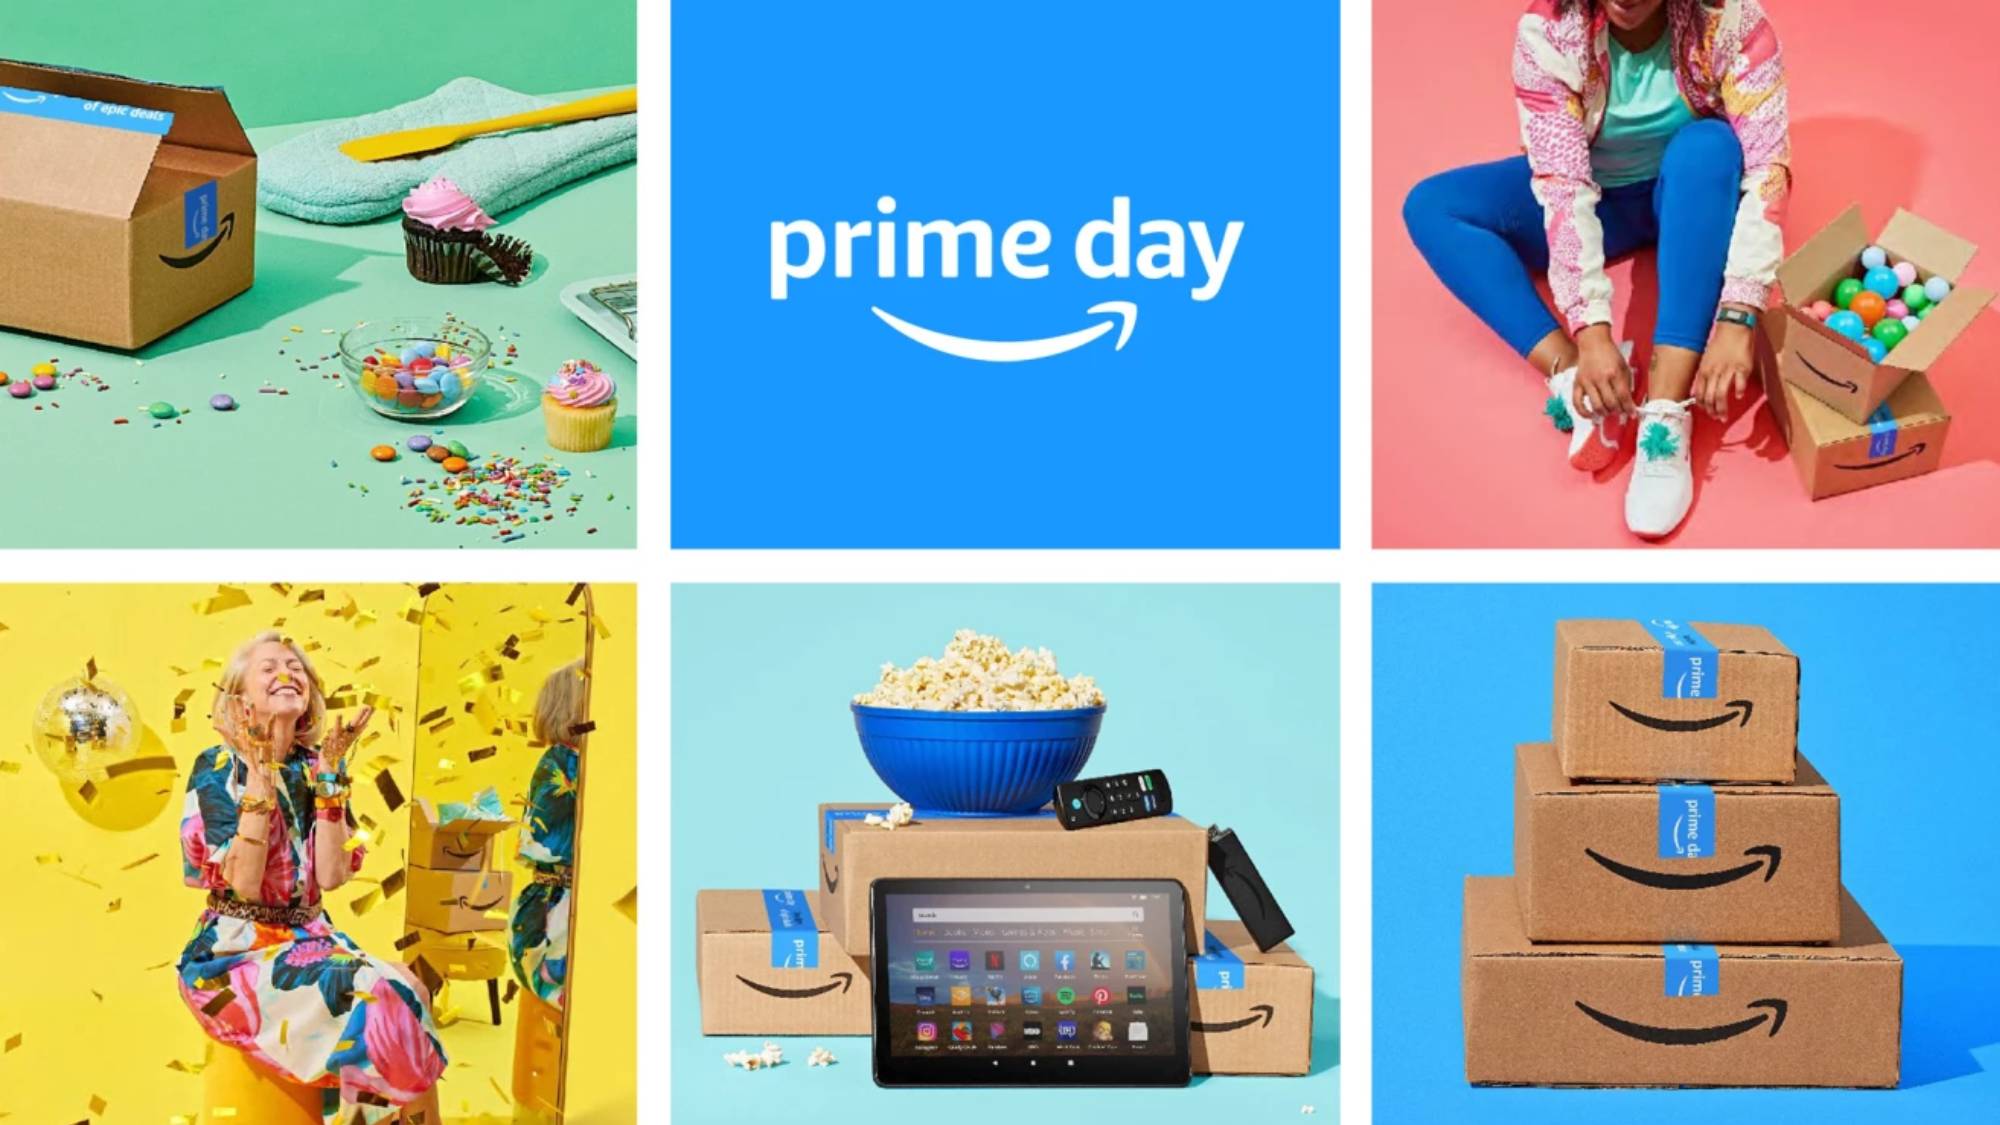 Start Freeloading Over 30 Games with Prime Gaming For Prime Day